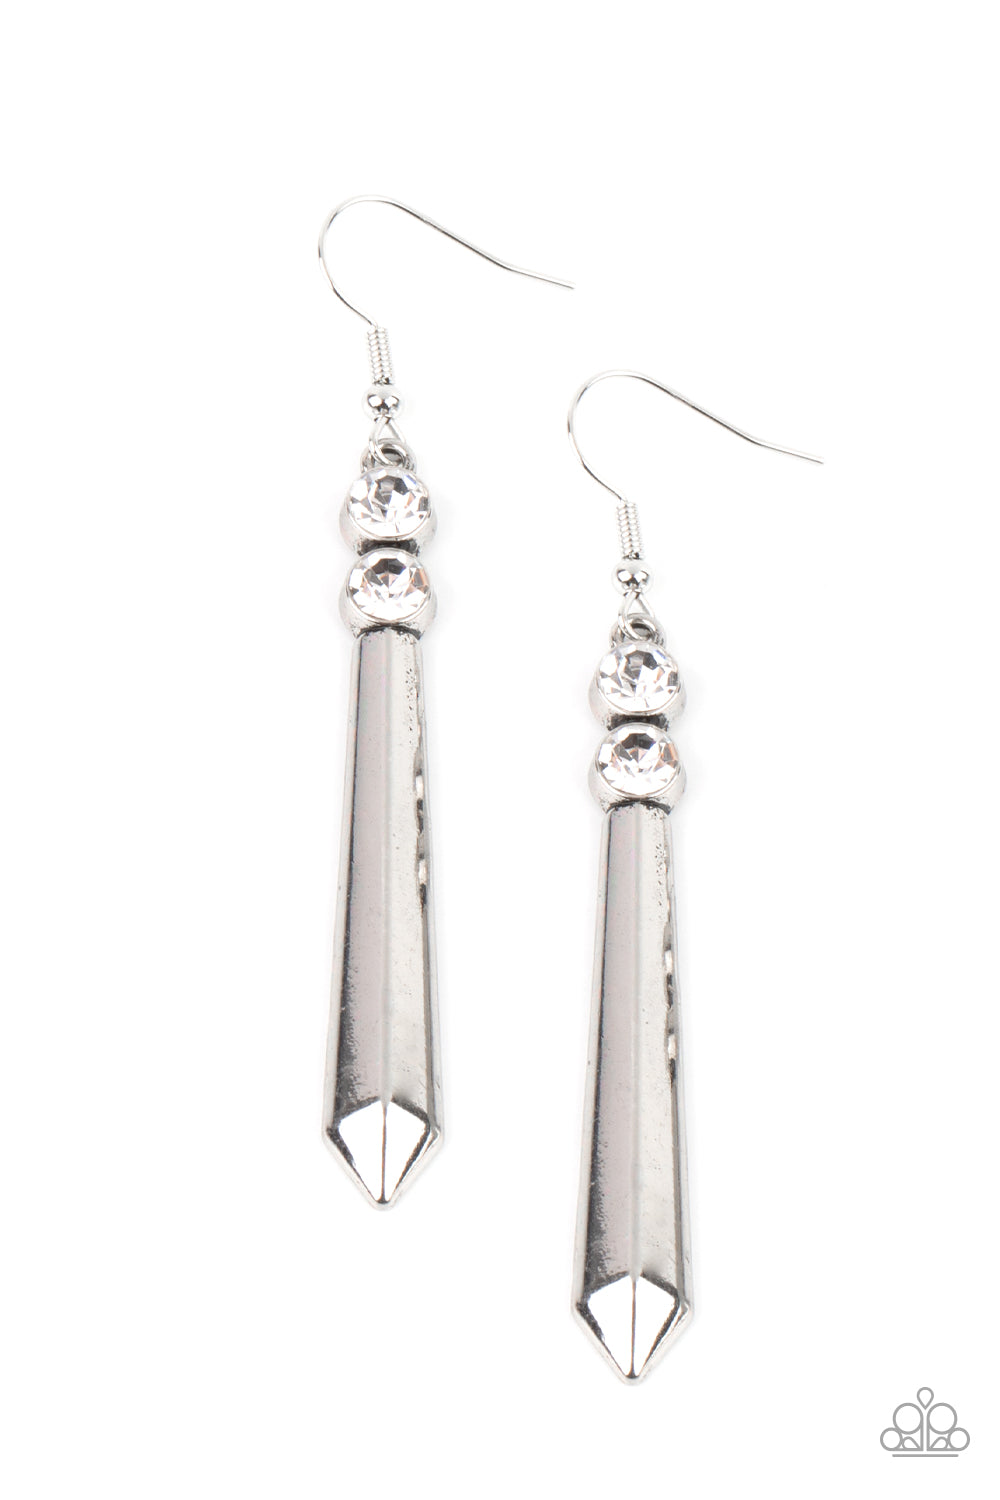 Sparkle Stream White Earring - Paparazzi Accessories  A pair of glittery white rhinestones crowns a flared silver rod, creating a sharp-looking lure. Earring attaches to a standard fishhook fitting.  All Paparazzi Accessories are lead free and nickel free!  Sold as one pair of earrings.